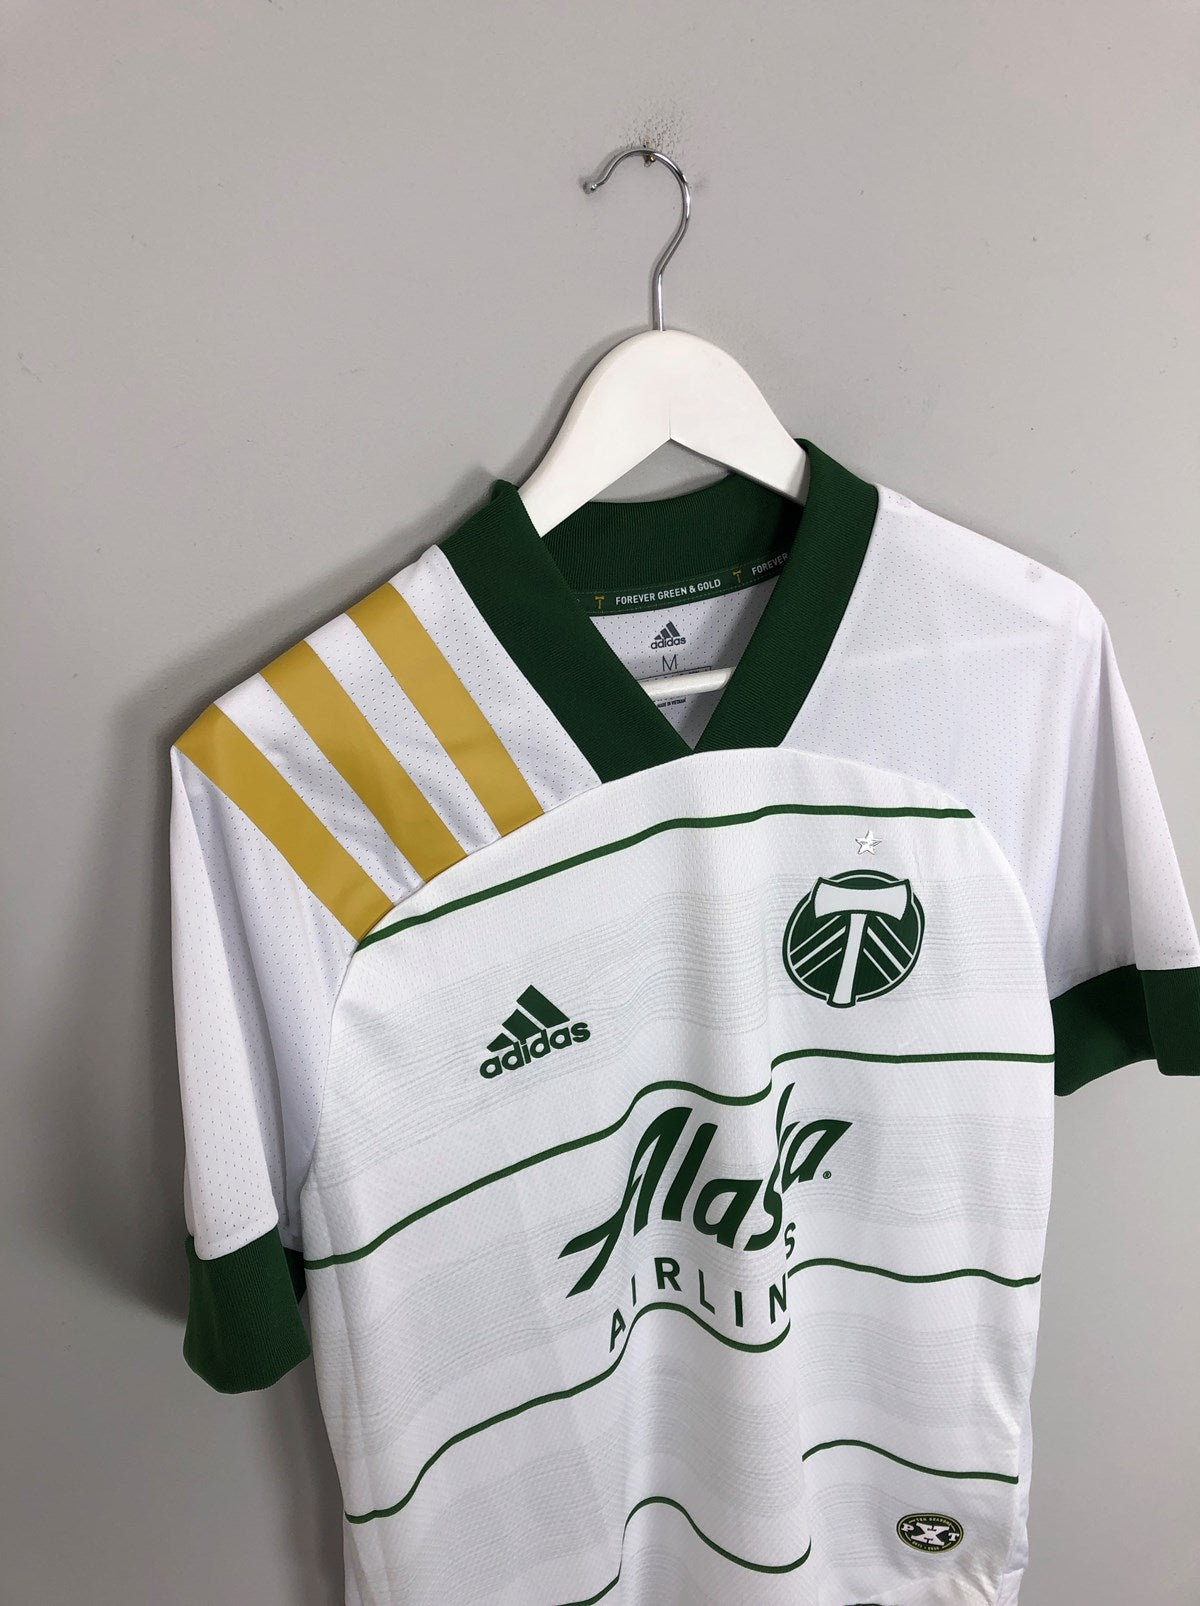 Put a Star on It, Get an MLS Cup star for your Portland Timbers kit  exclusively at the adidas Timbers Team Store